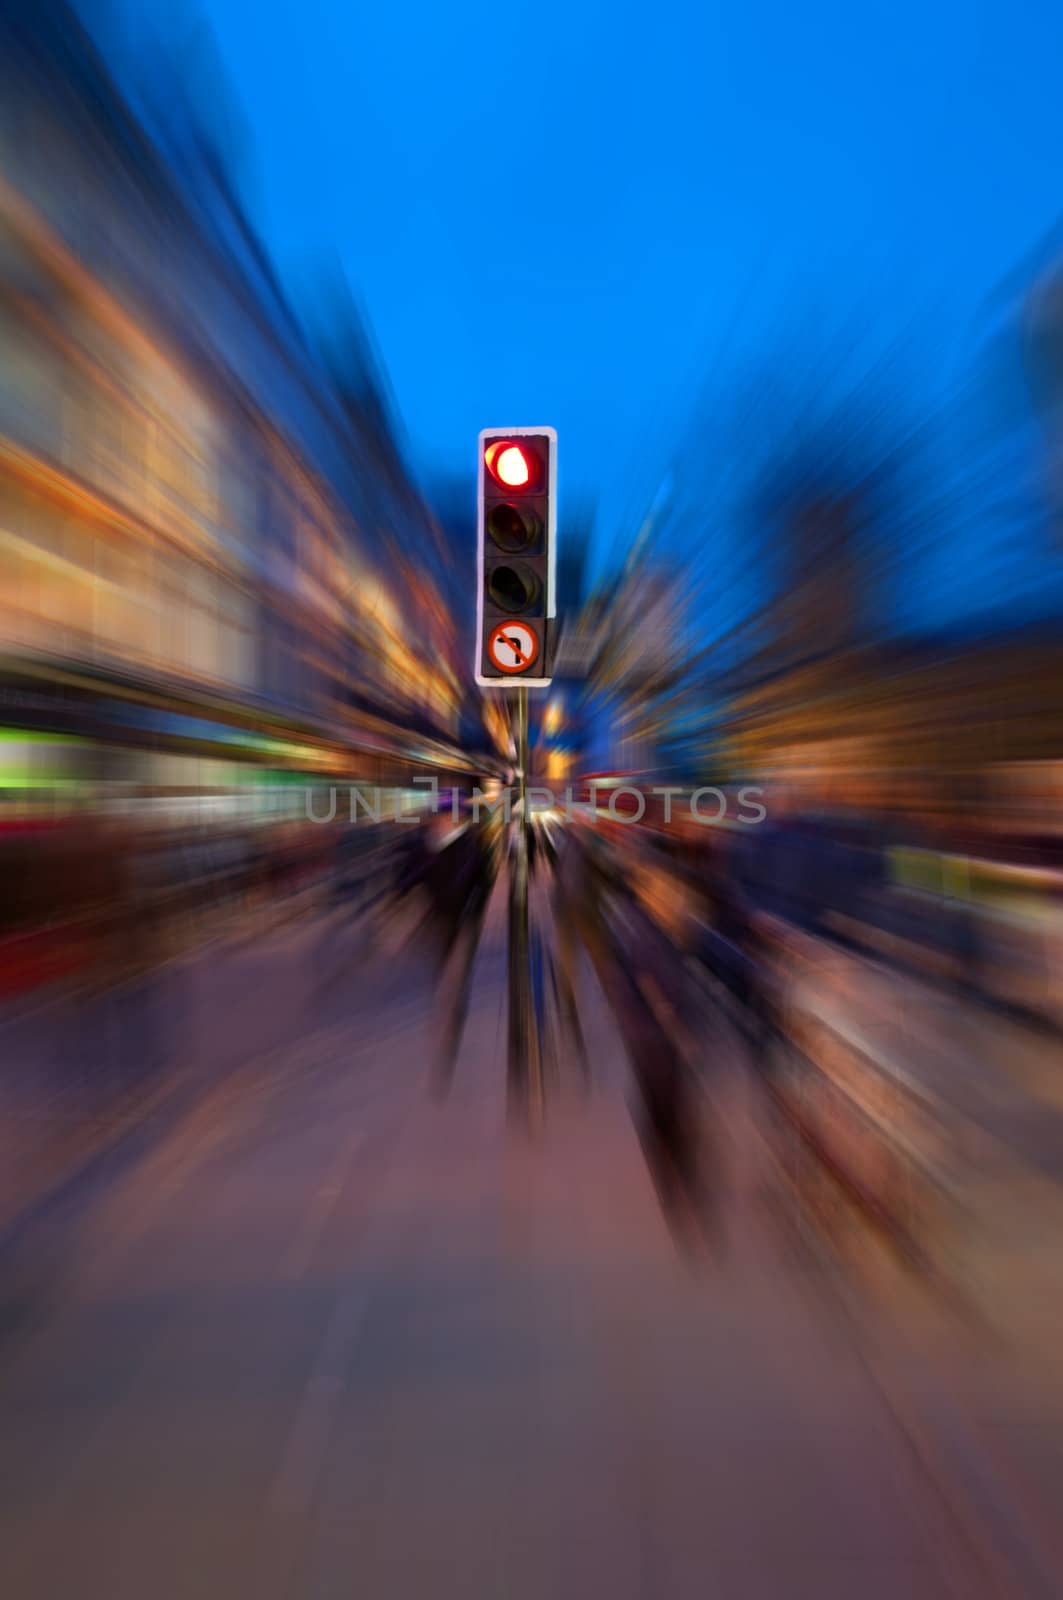 A traffic light surrounded by radial motion blur giving a chaotic concept to an evening urban street.